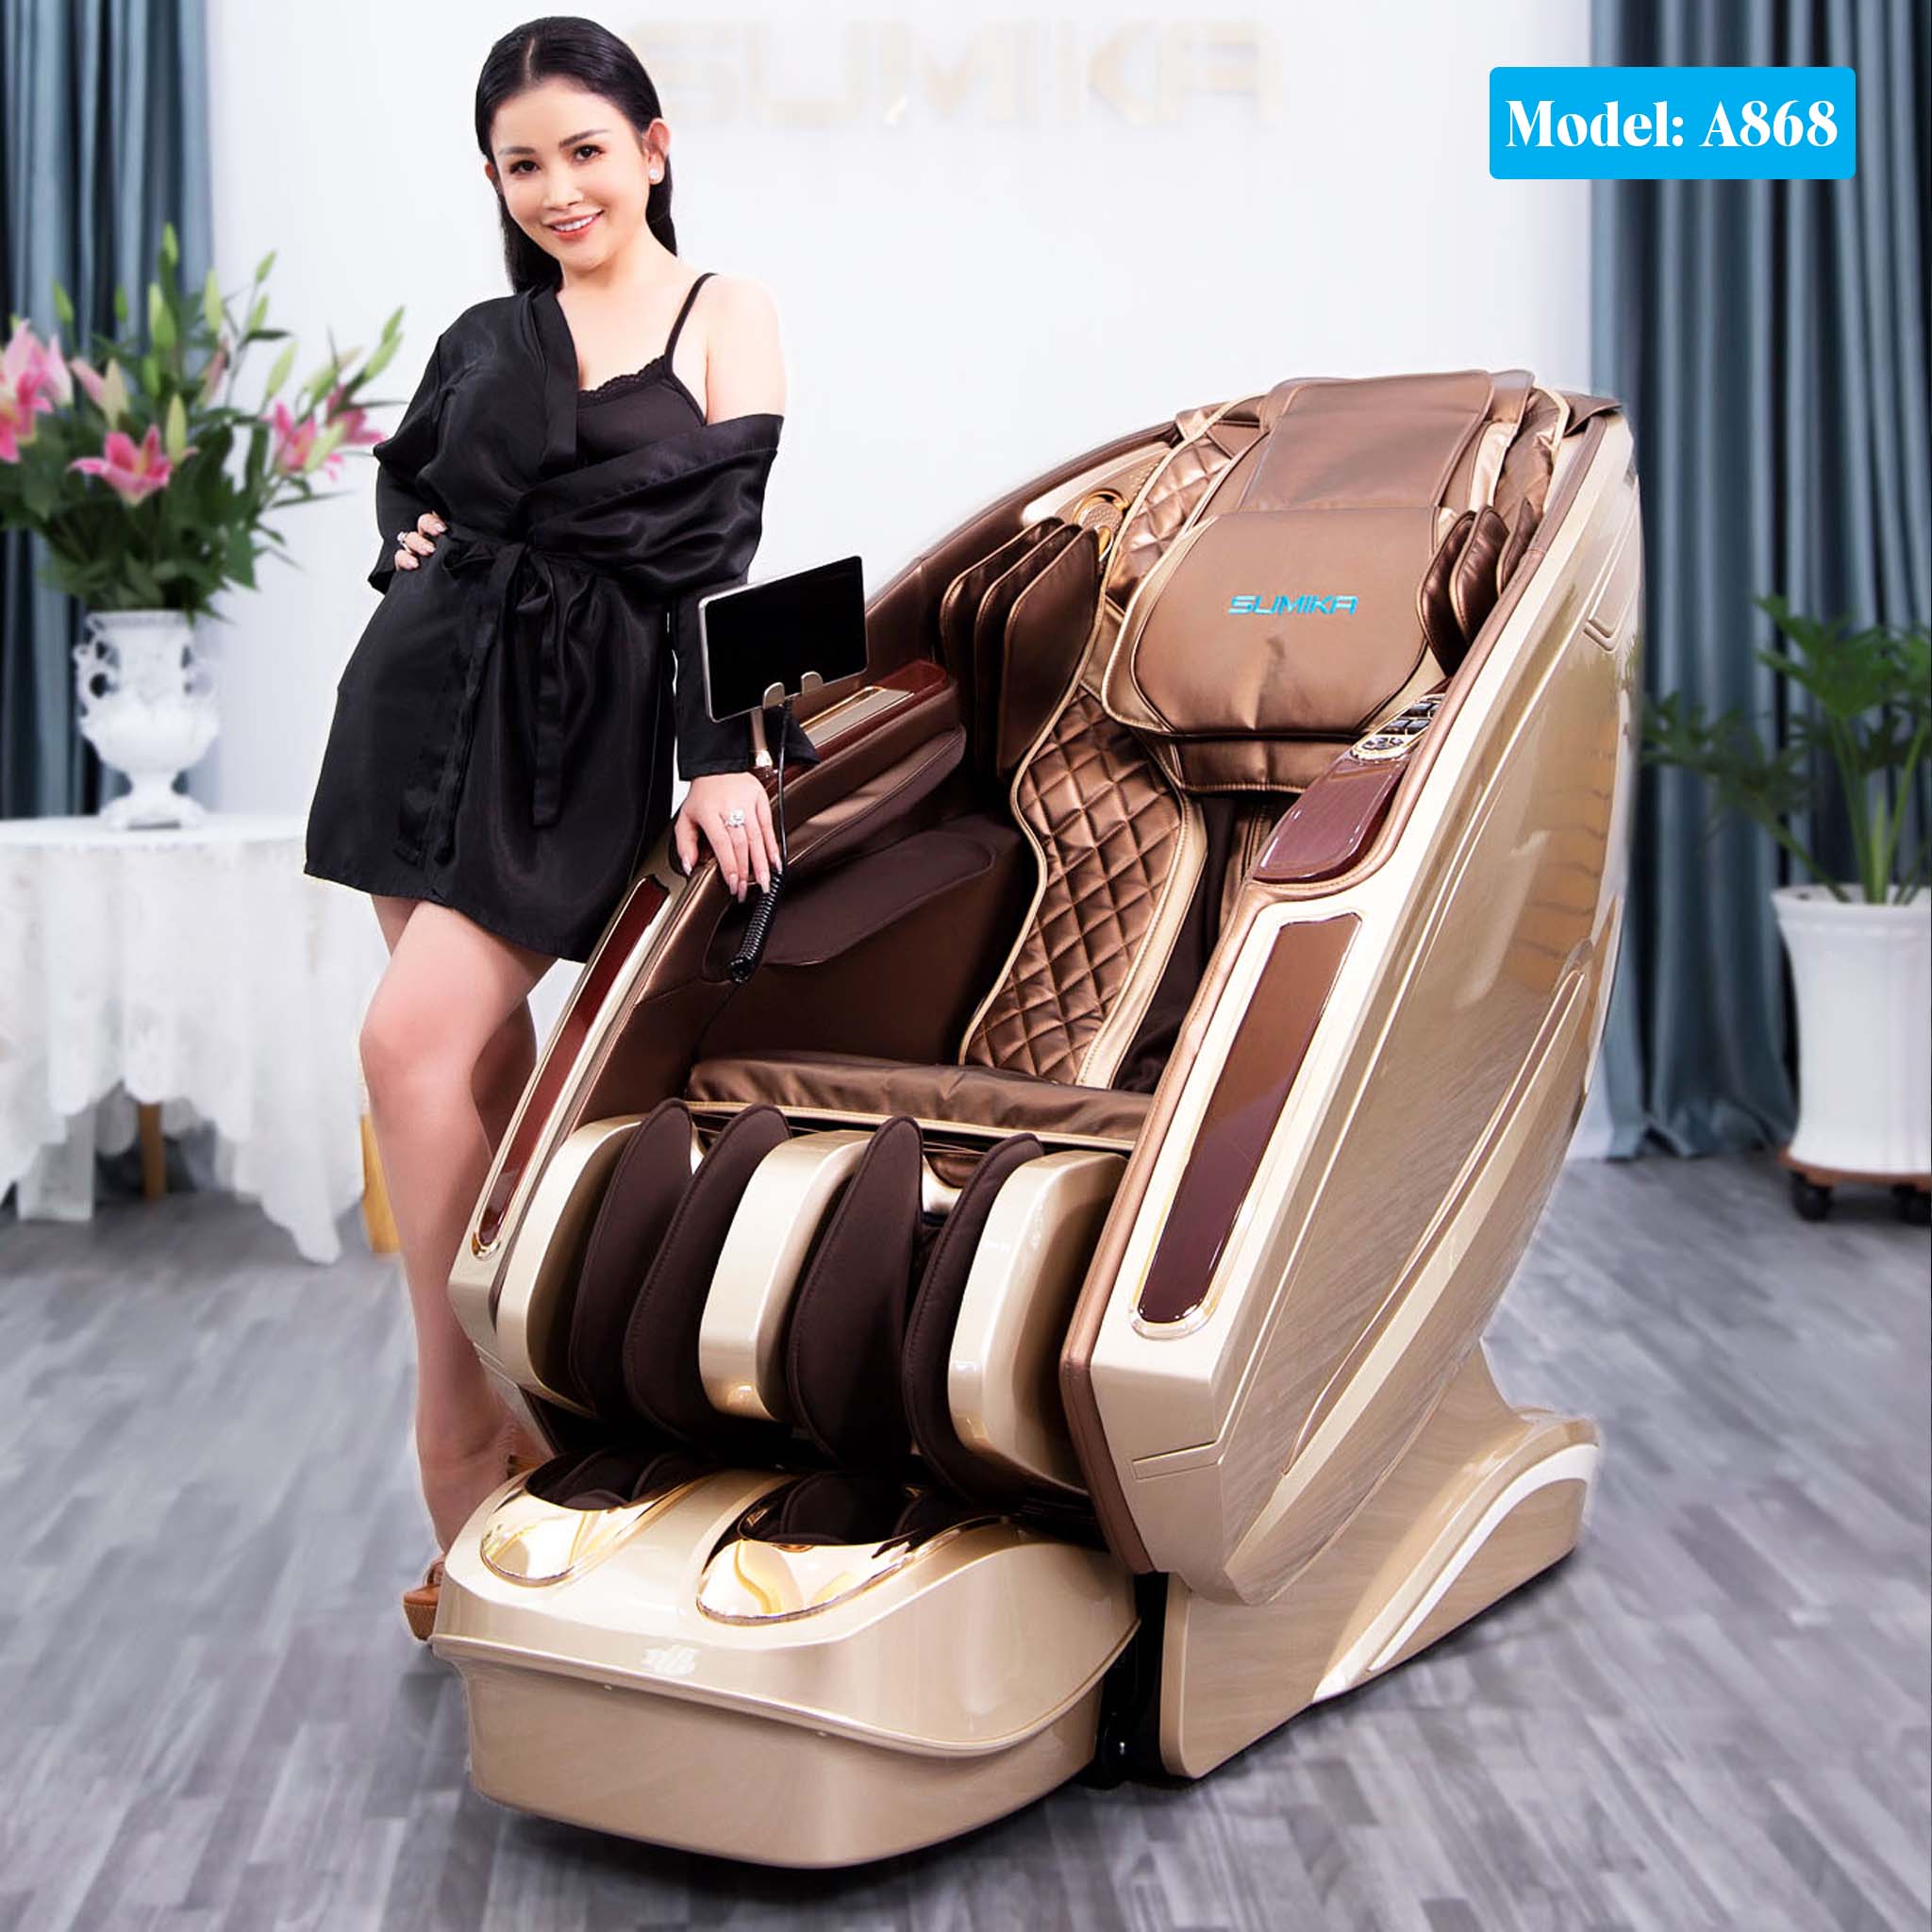 Sumika A868 (Gold) body massage chair (Gold)